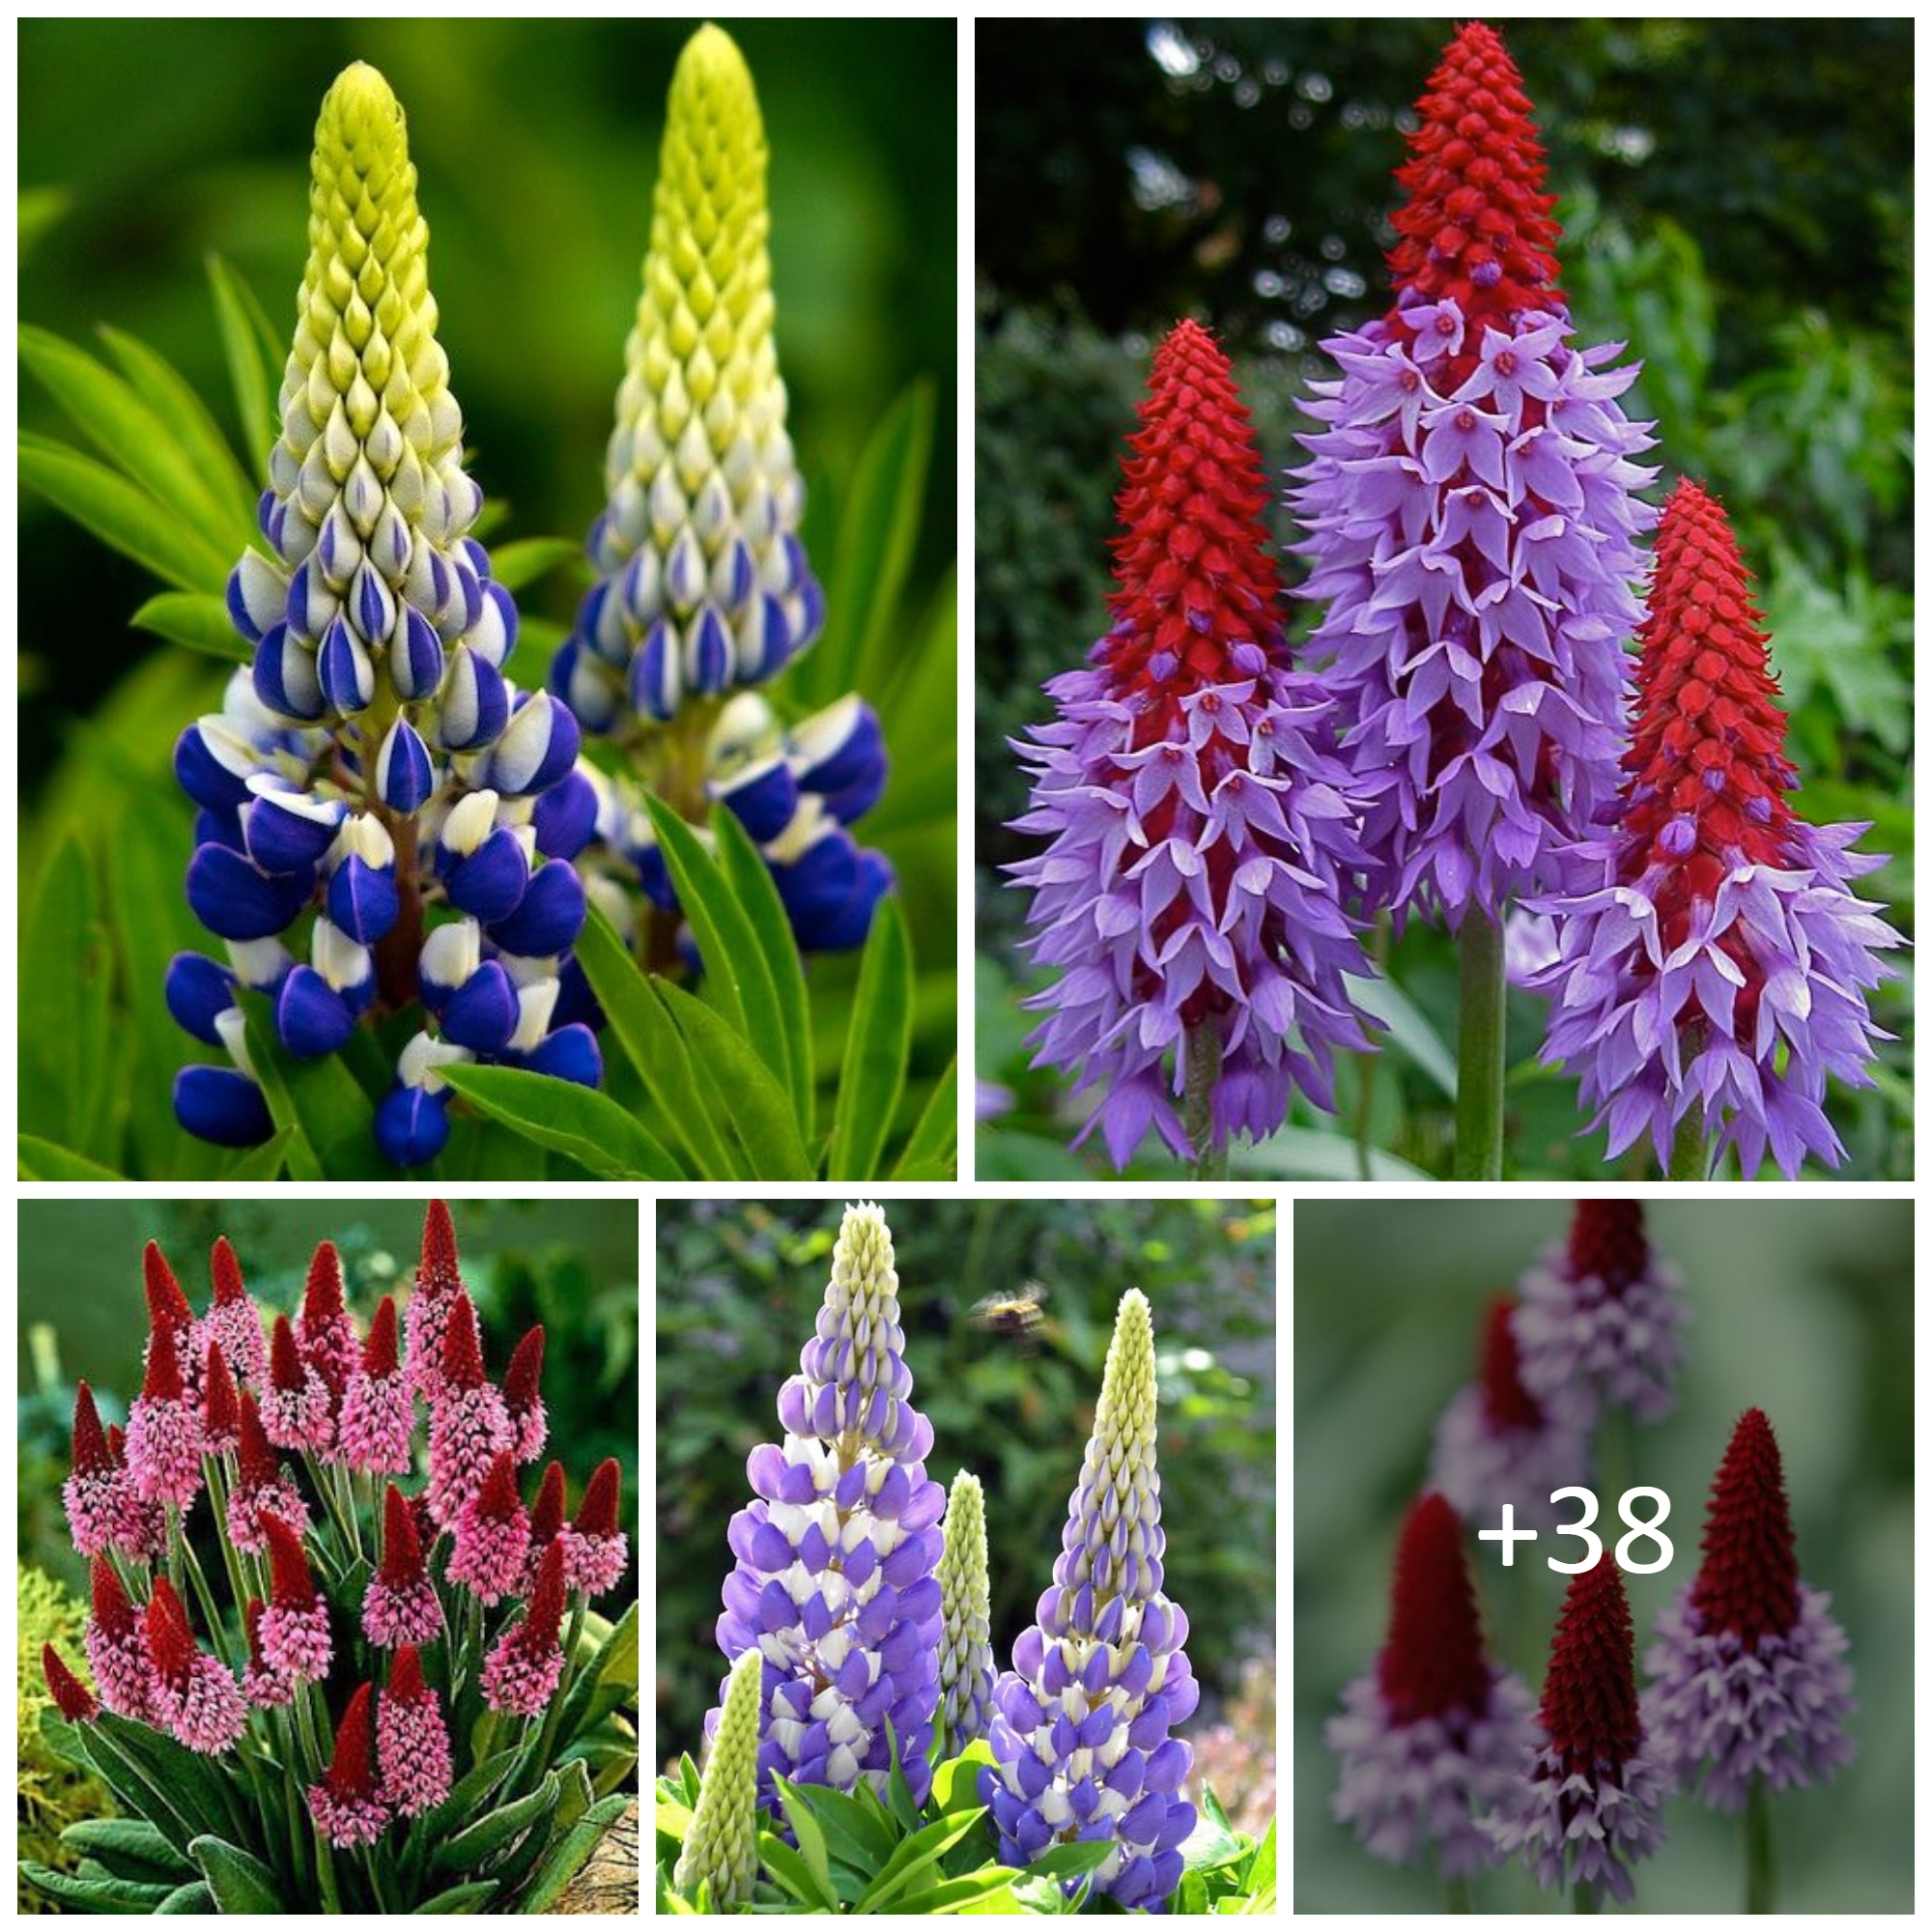 How to Grow and Care for Lupine Flowers